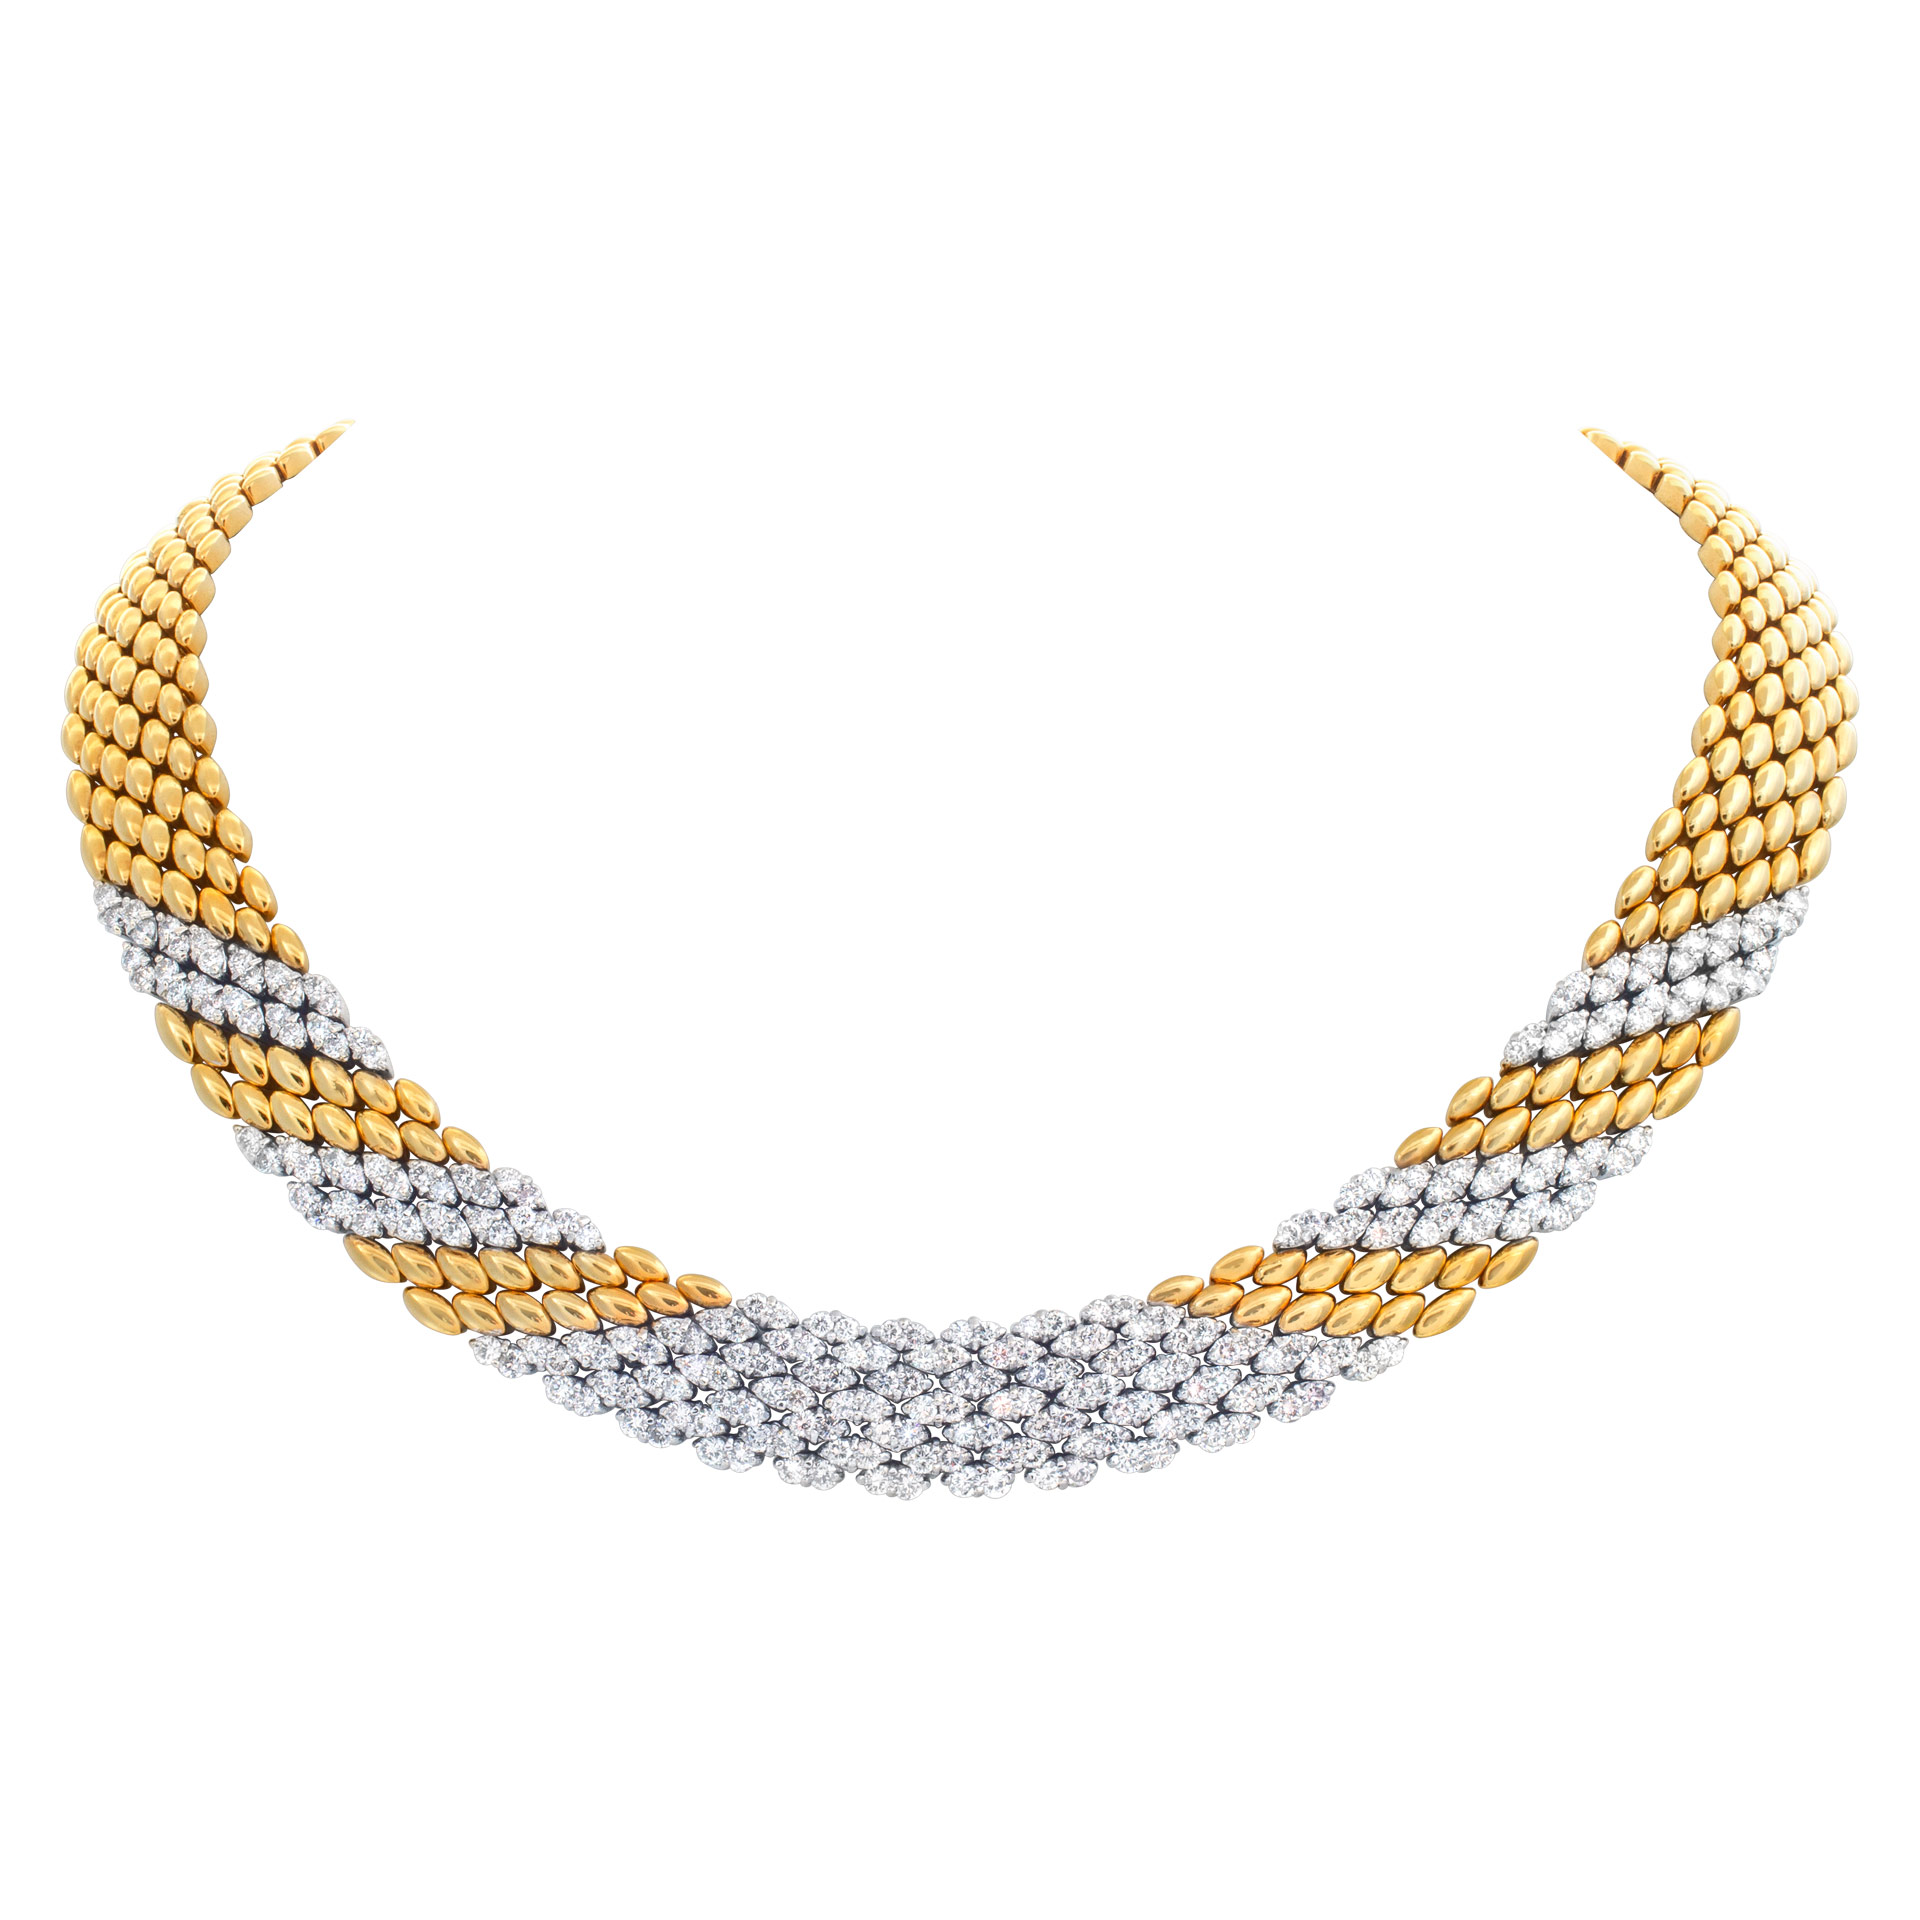 Stylish "PANTHERE" link style necklace with over 8.50 carats full cut round brilliant diamonds  set in 18K yellow gold. image 1